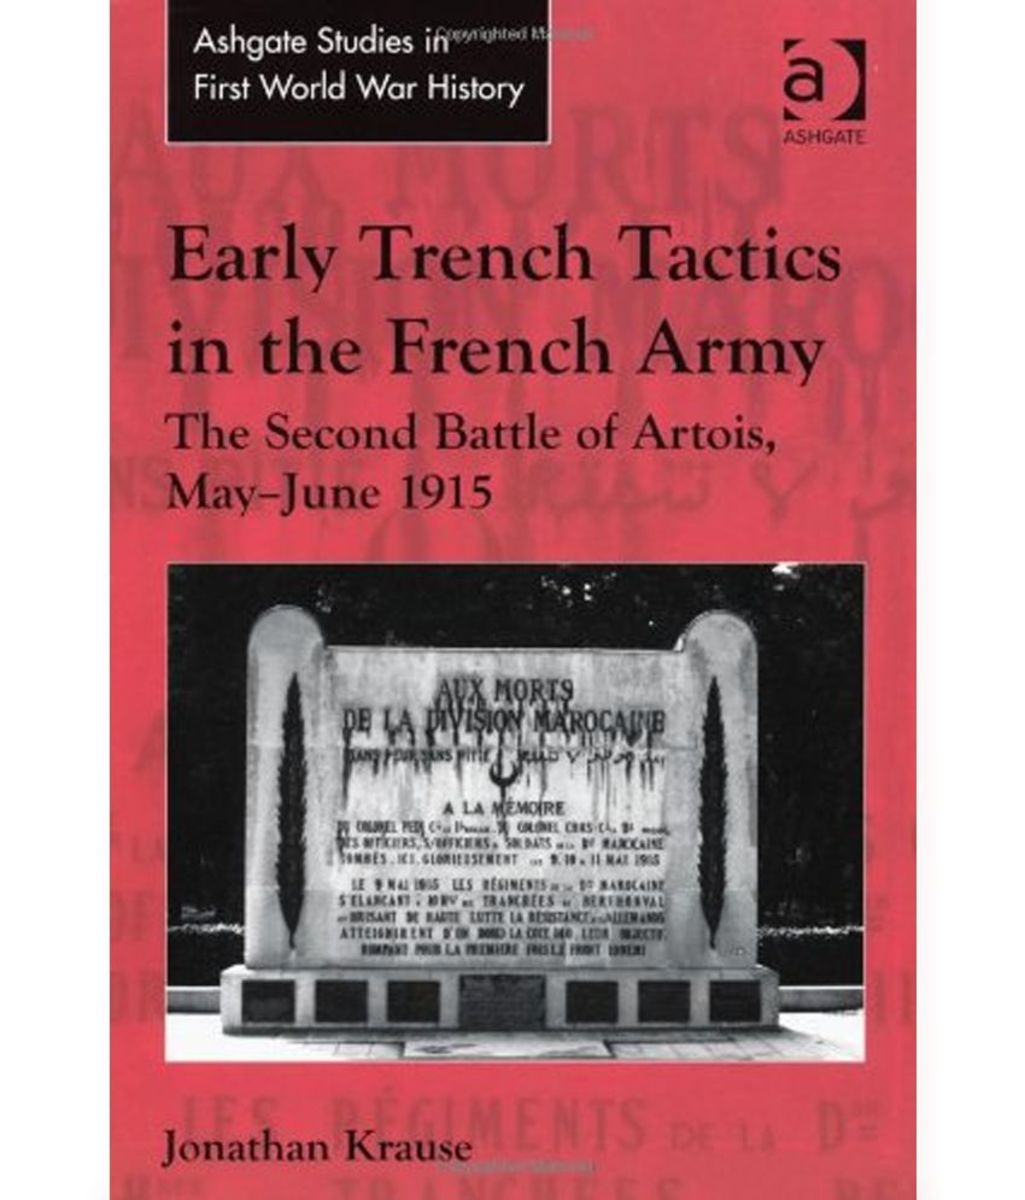 early-trench-tactics-in-the-french-army-review